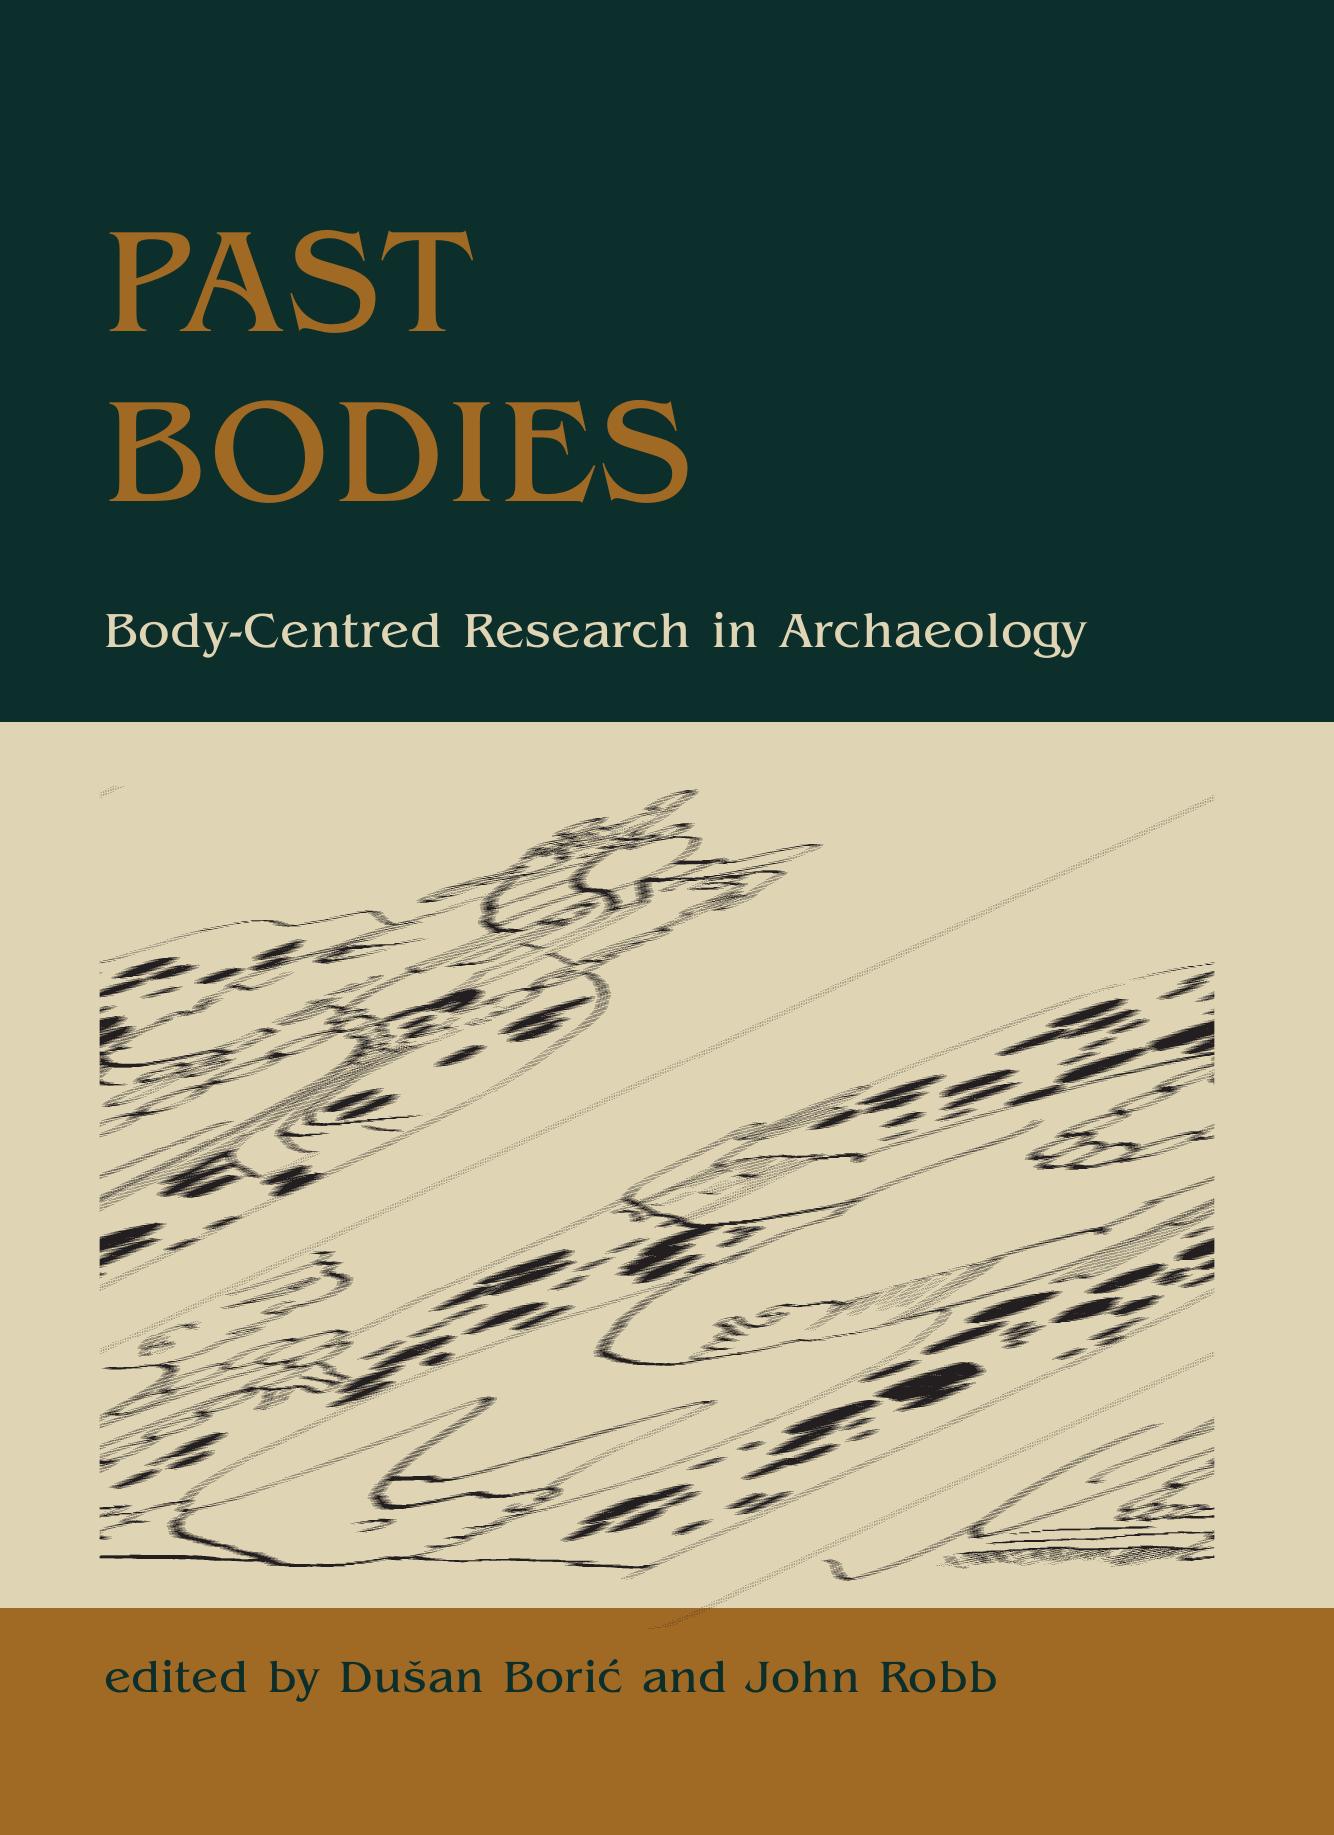 Past Bodies: Body-Centered Research in Archaeology by Dušan Borić John Robb